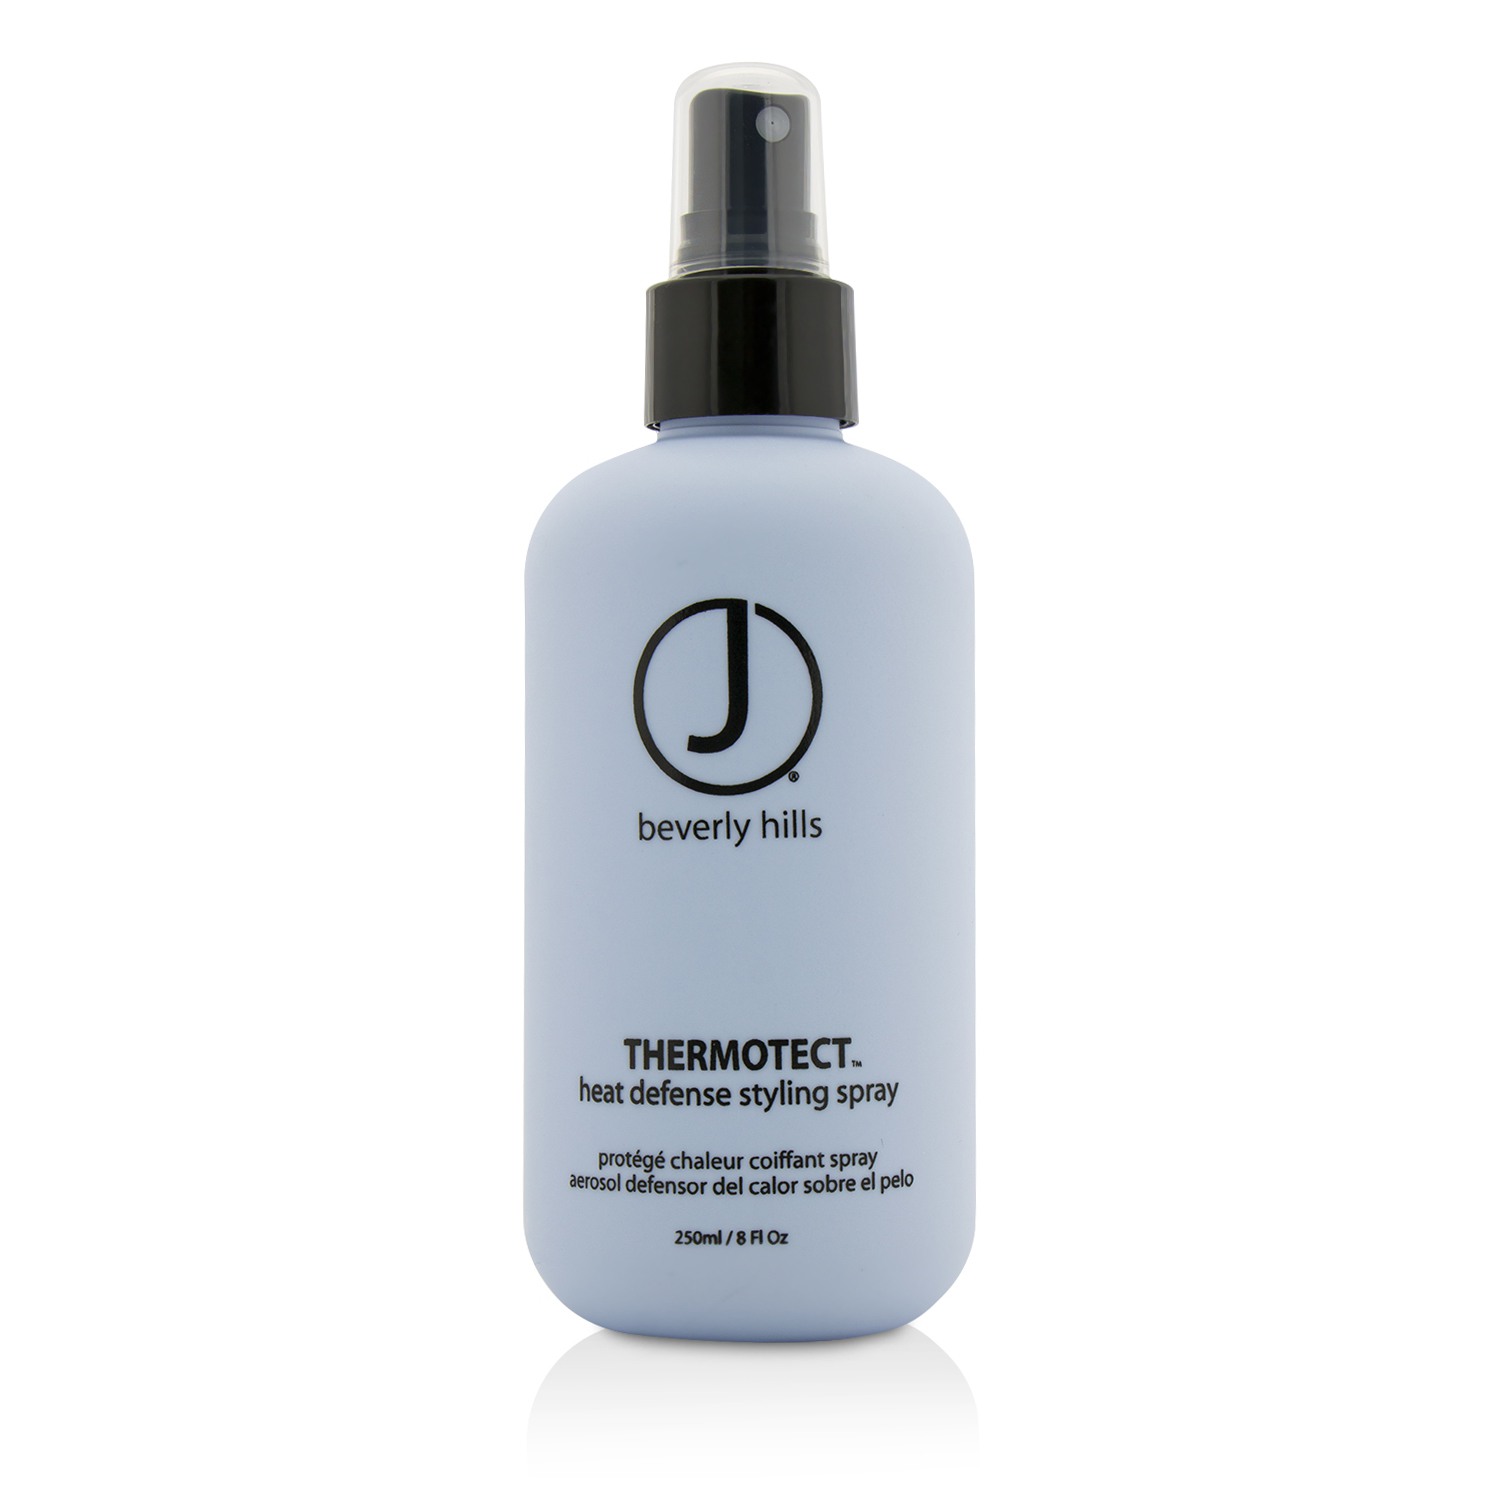 Thermotect Styling Heat Defense Spray J Beverly Hills Image